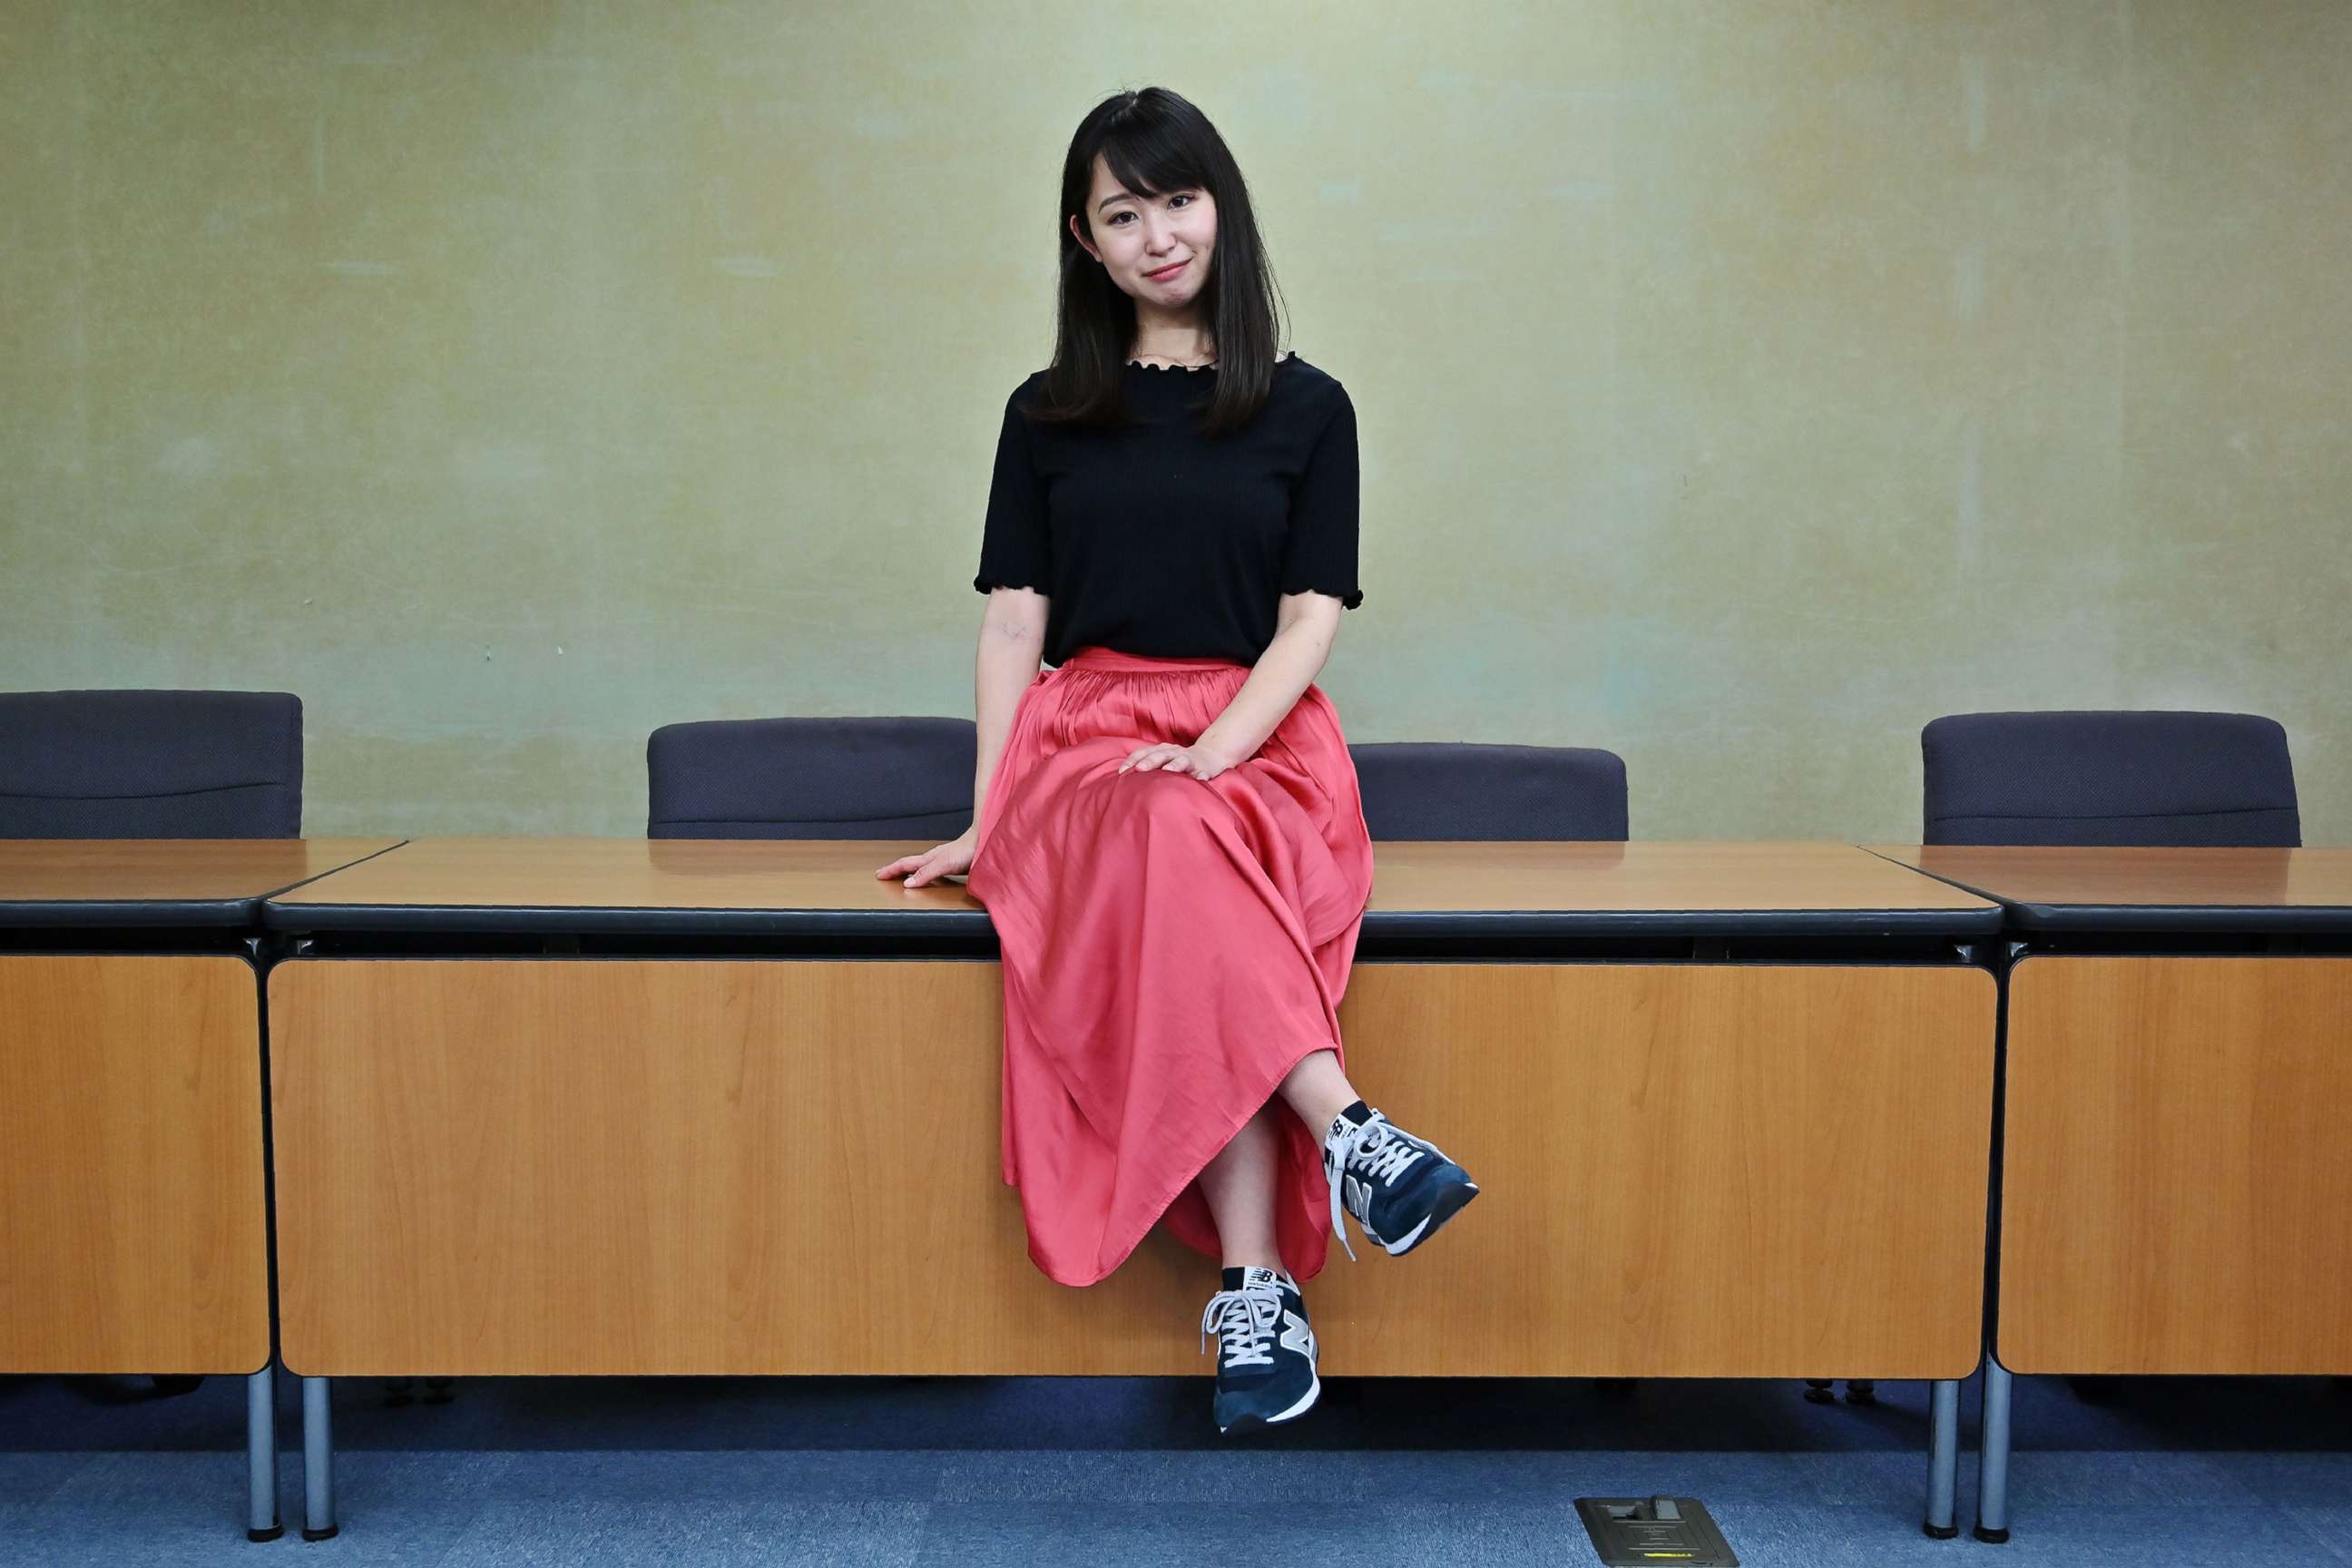 PHOTO: Yumi Ishikawa, leader and founder of the KuToo movement, poses after a press conference in Tokyo on June 3, 2019. 